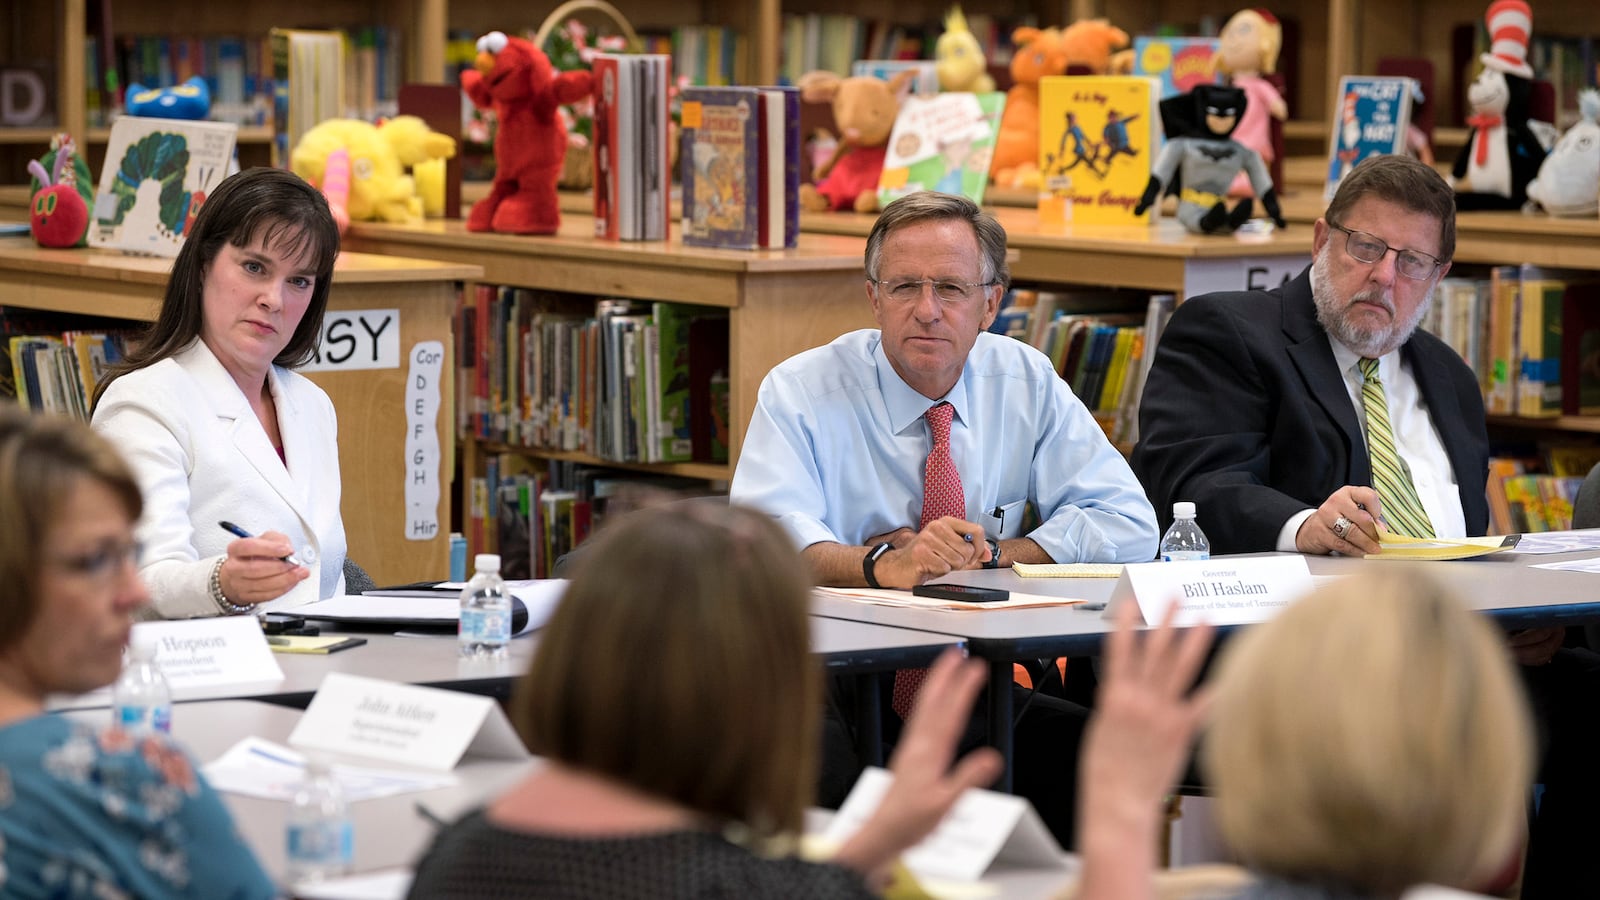 Gov. Bill Haslam (center) listens to feedback of teachers, school administrators, and testing coordinators during an Aug. 30 roundtable session in Shelby County. His education commissioner, Candice McQueen (left) participated in all six roundtable gatherings, along with Wayne Miller (right), the retired chief of the state's superintentents association, who chaired Haslam's "listening tour" advisory team.